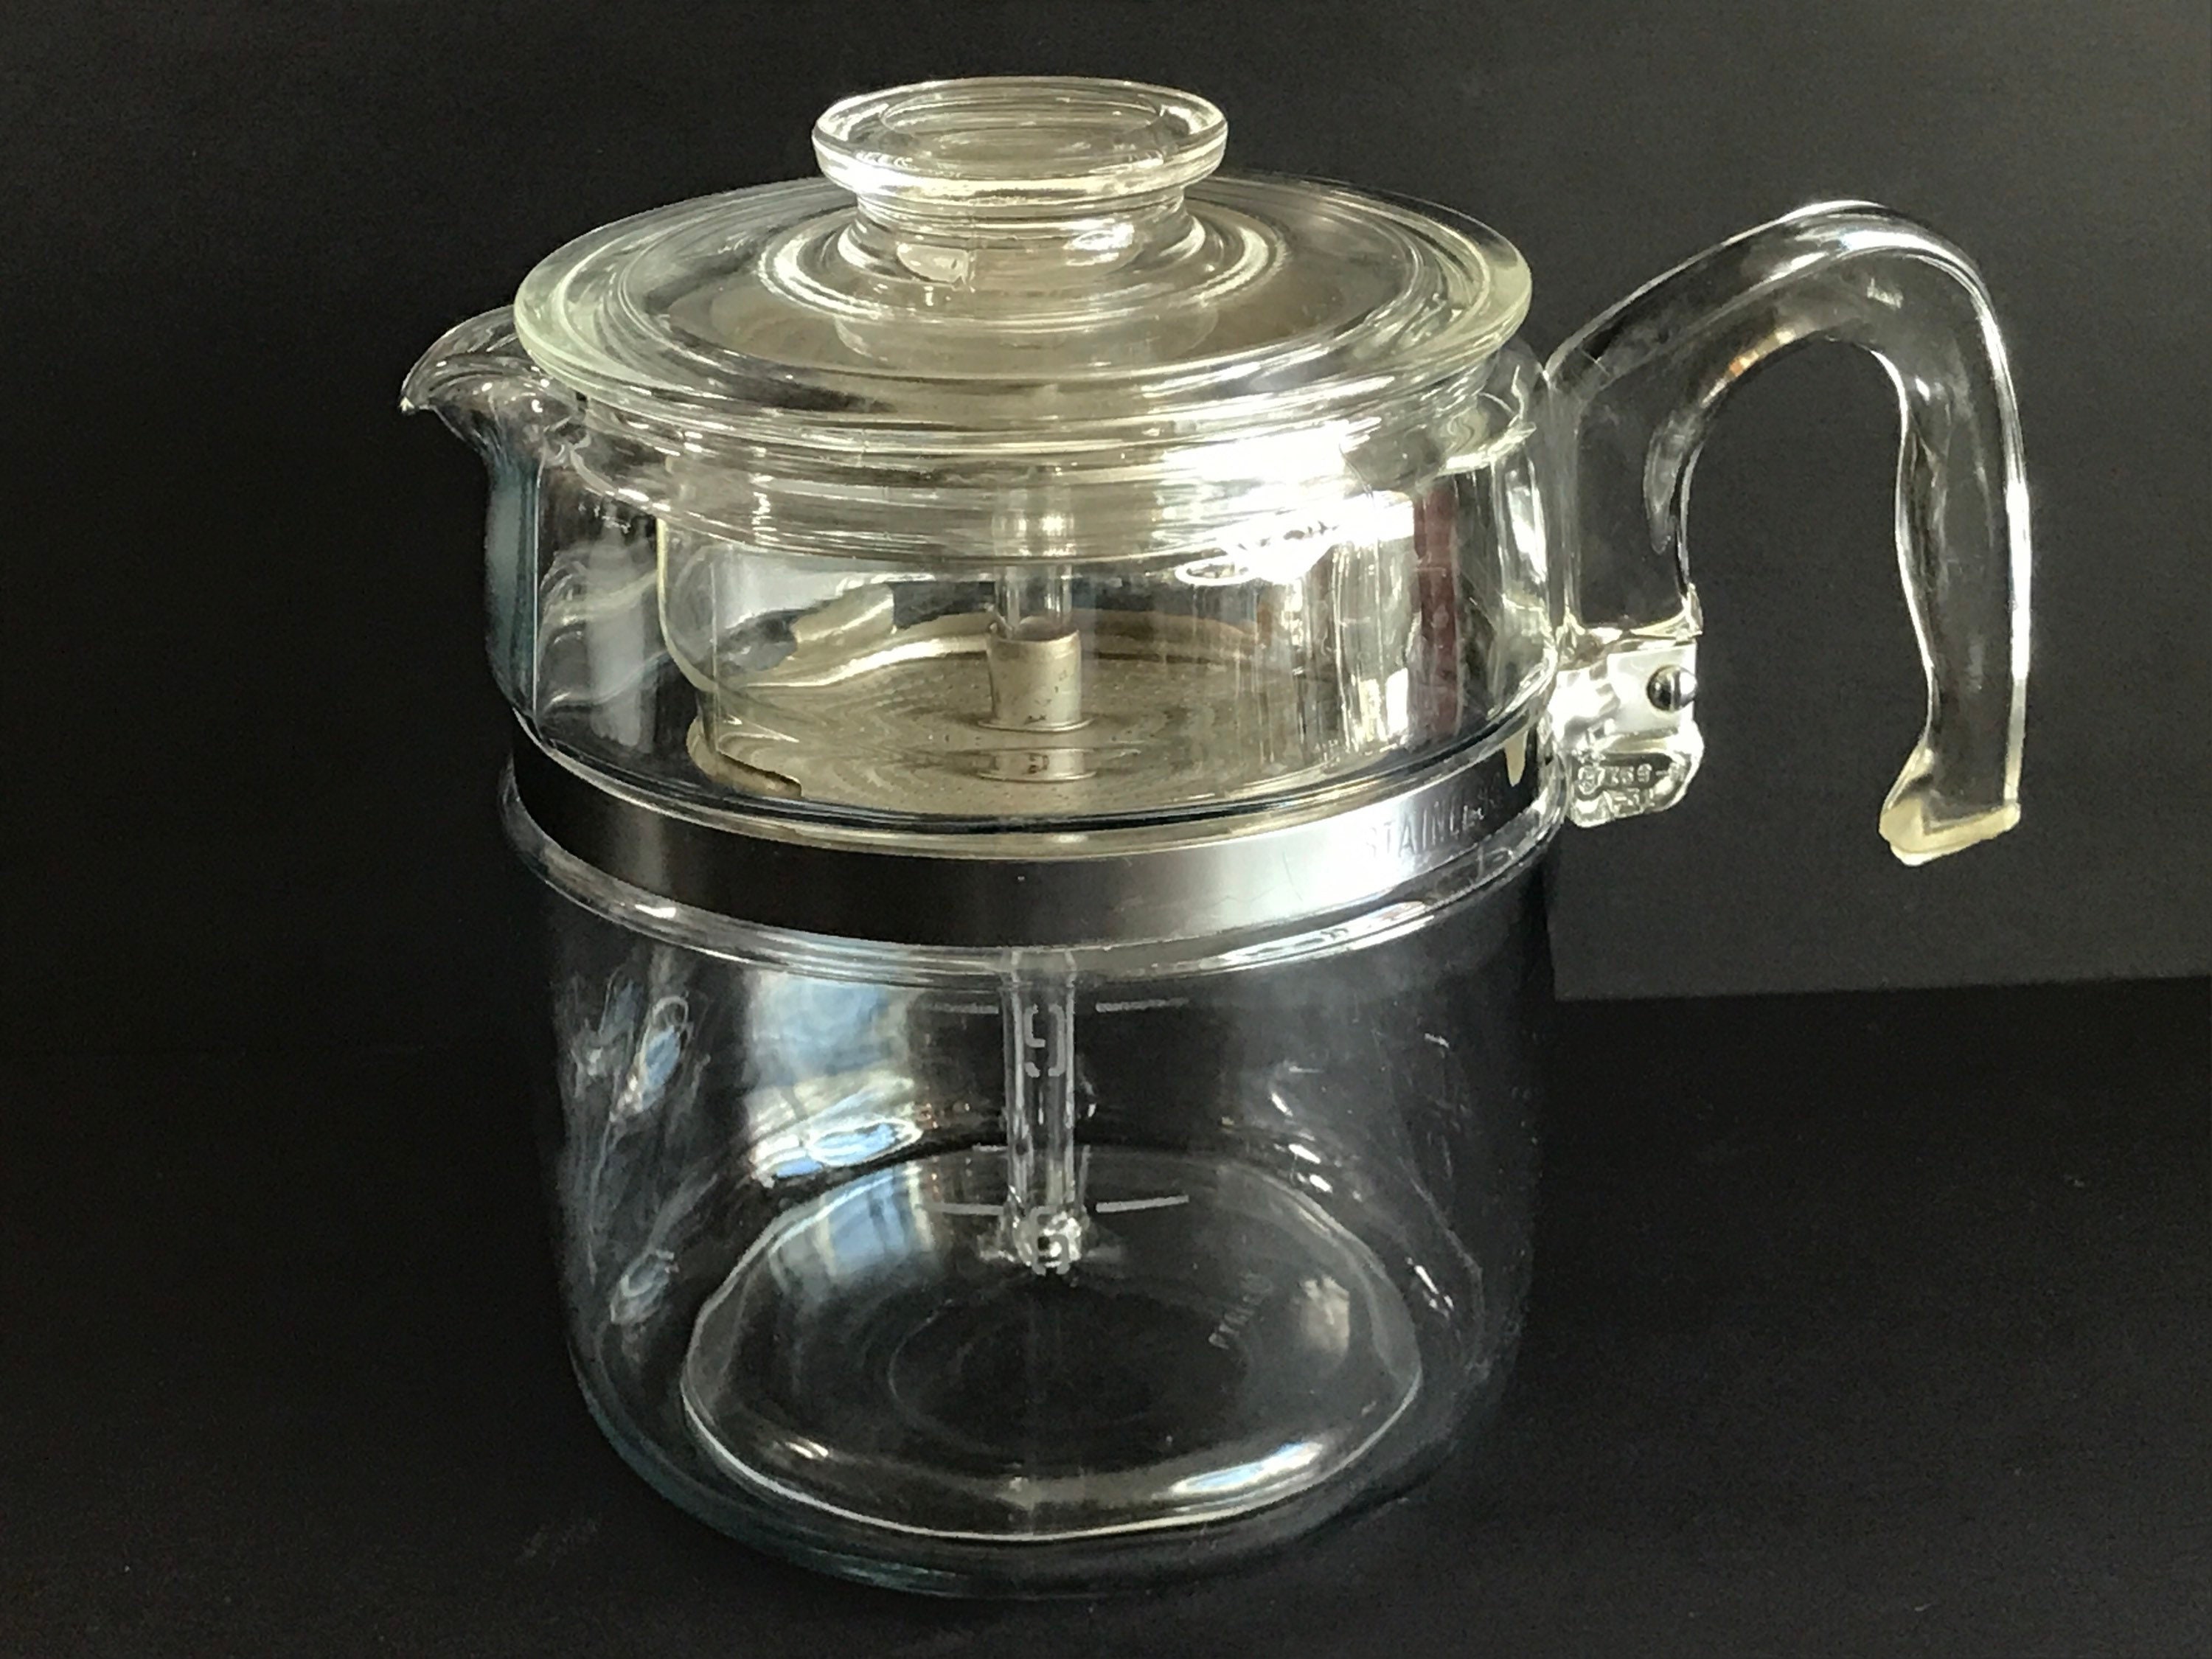 PYREX Flameware 6 Cup Glass Coffee Pot Coffee Percolator All Parts 7756  Vintage Coffee Carafe Retro by Corning Tea Pot Teapot 